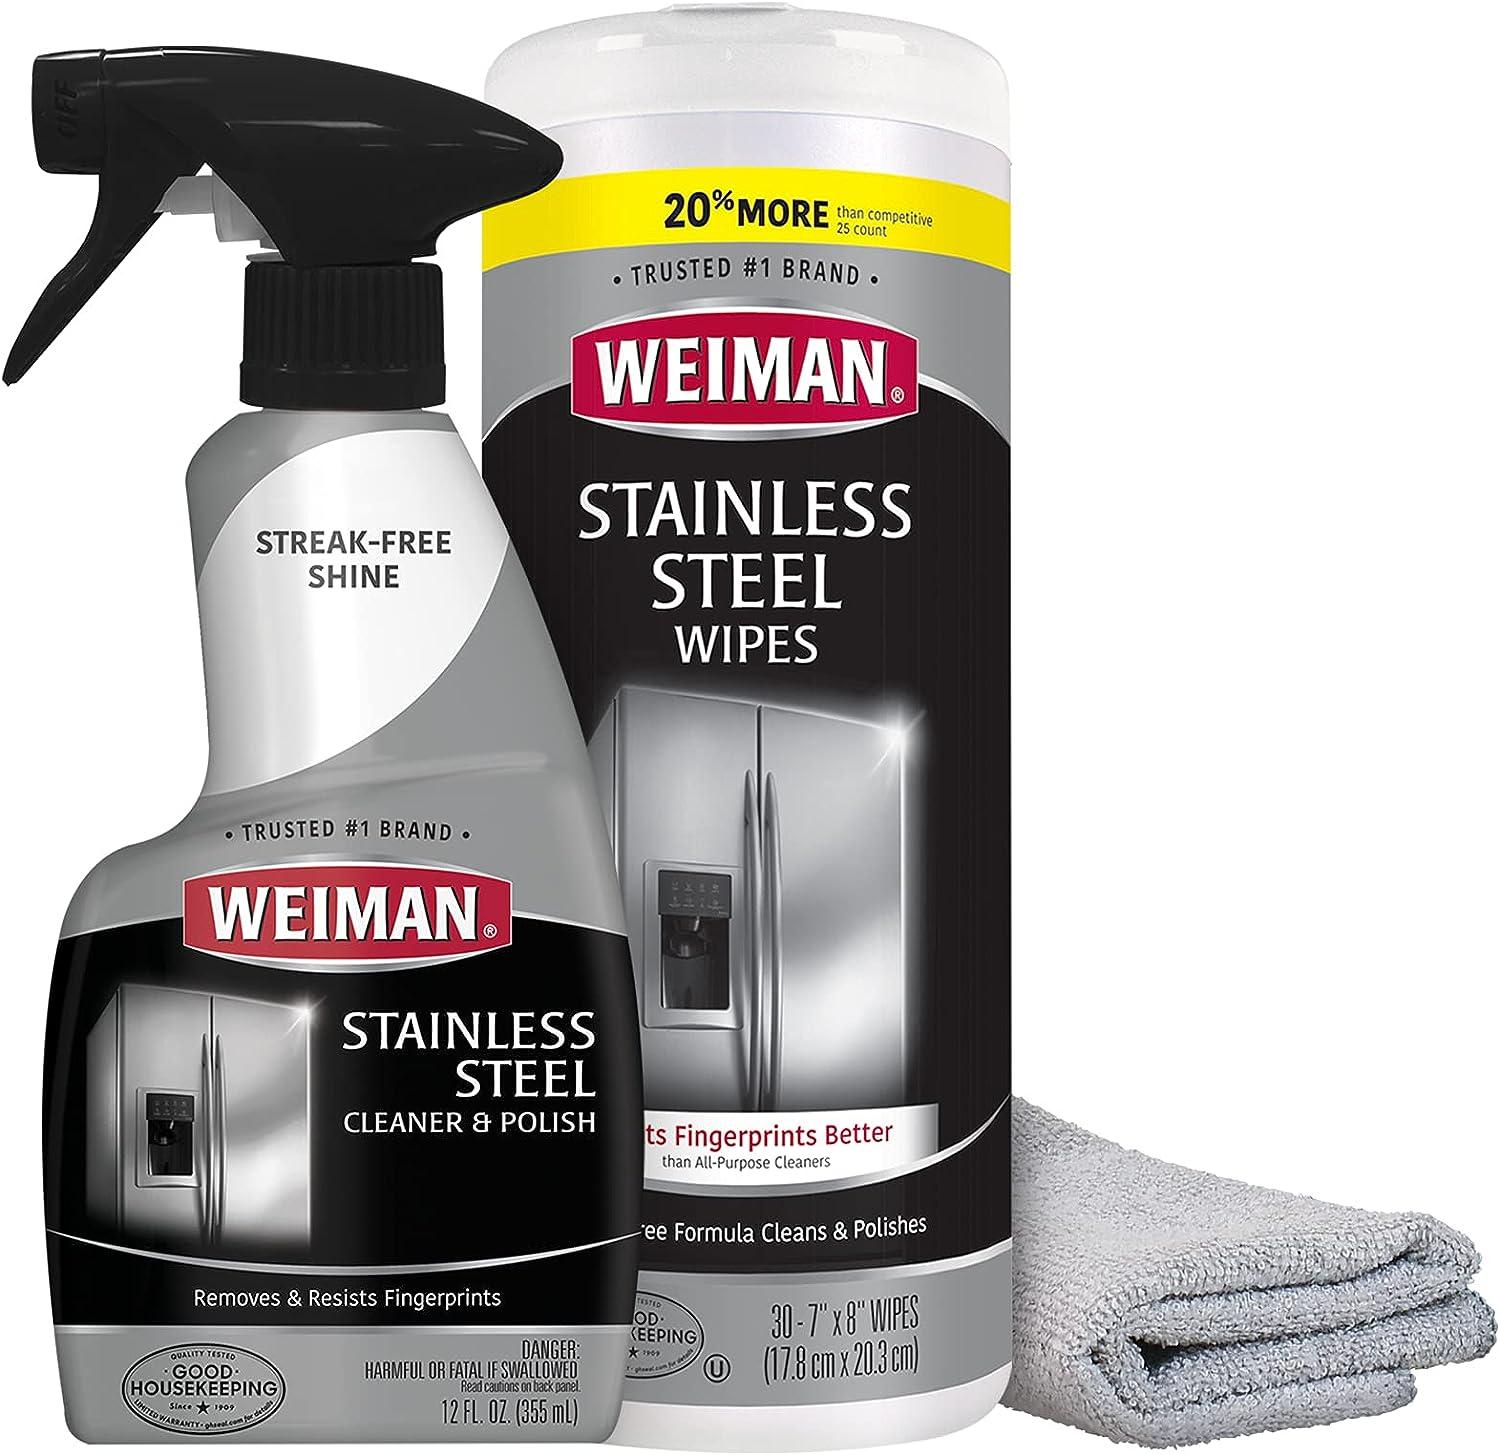 WEIMAN PRODUCTS REMOVER RUST SURFACE SAFE 24OZ